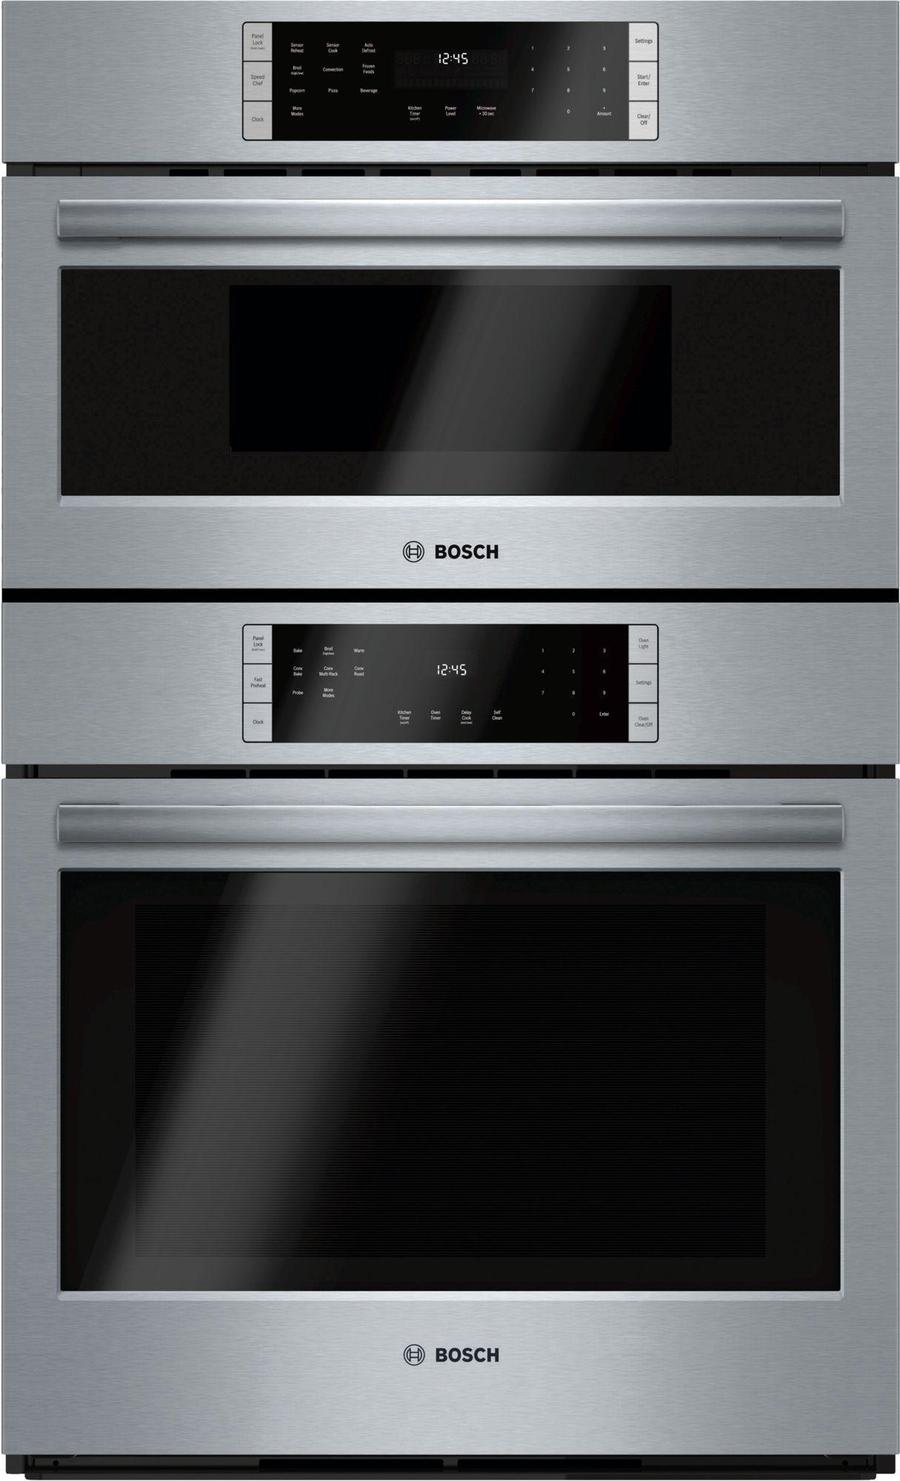 Bosch - 4.6 cu. ft Combination Wall Oven in Stainless Steel - HBL8752UC